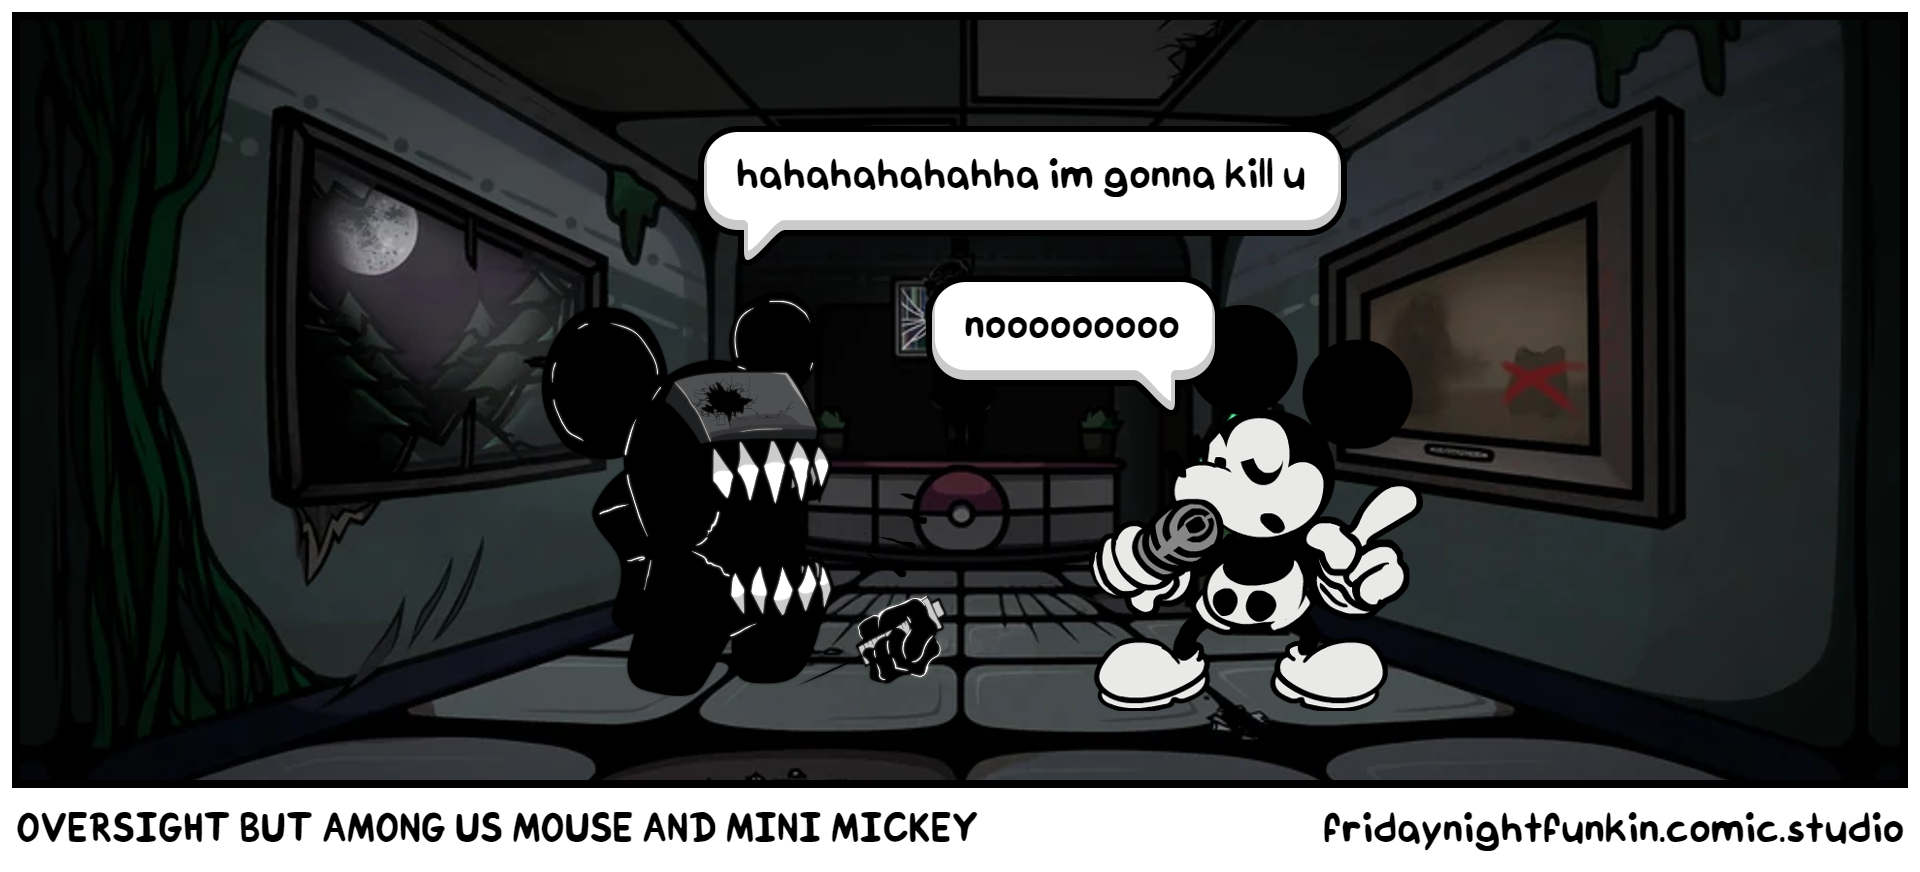 OVERSIGHT BUT AMONG US MOUSE AND MINI MICKEY